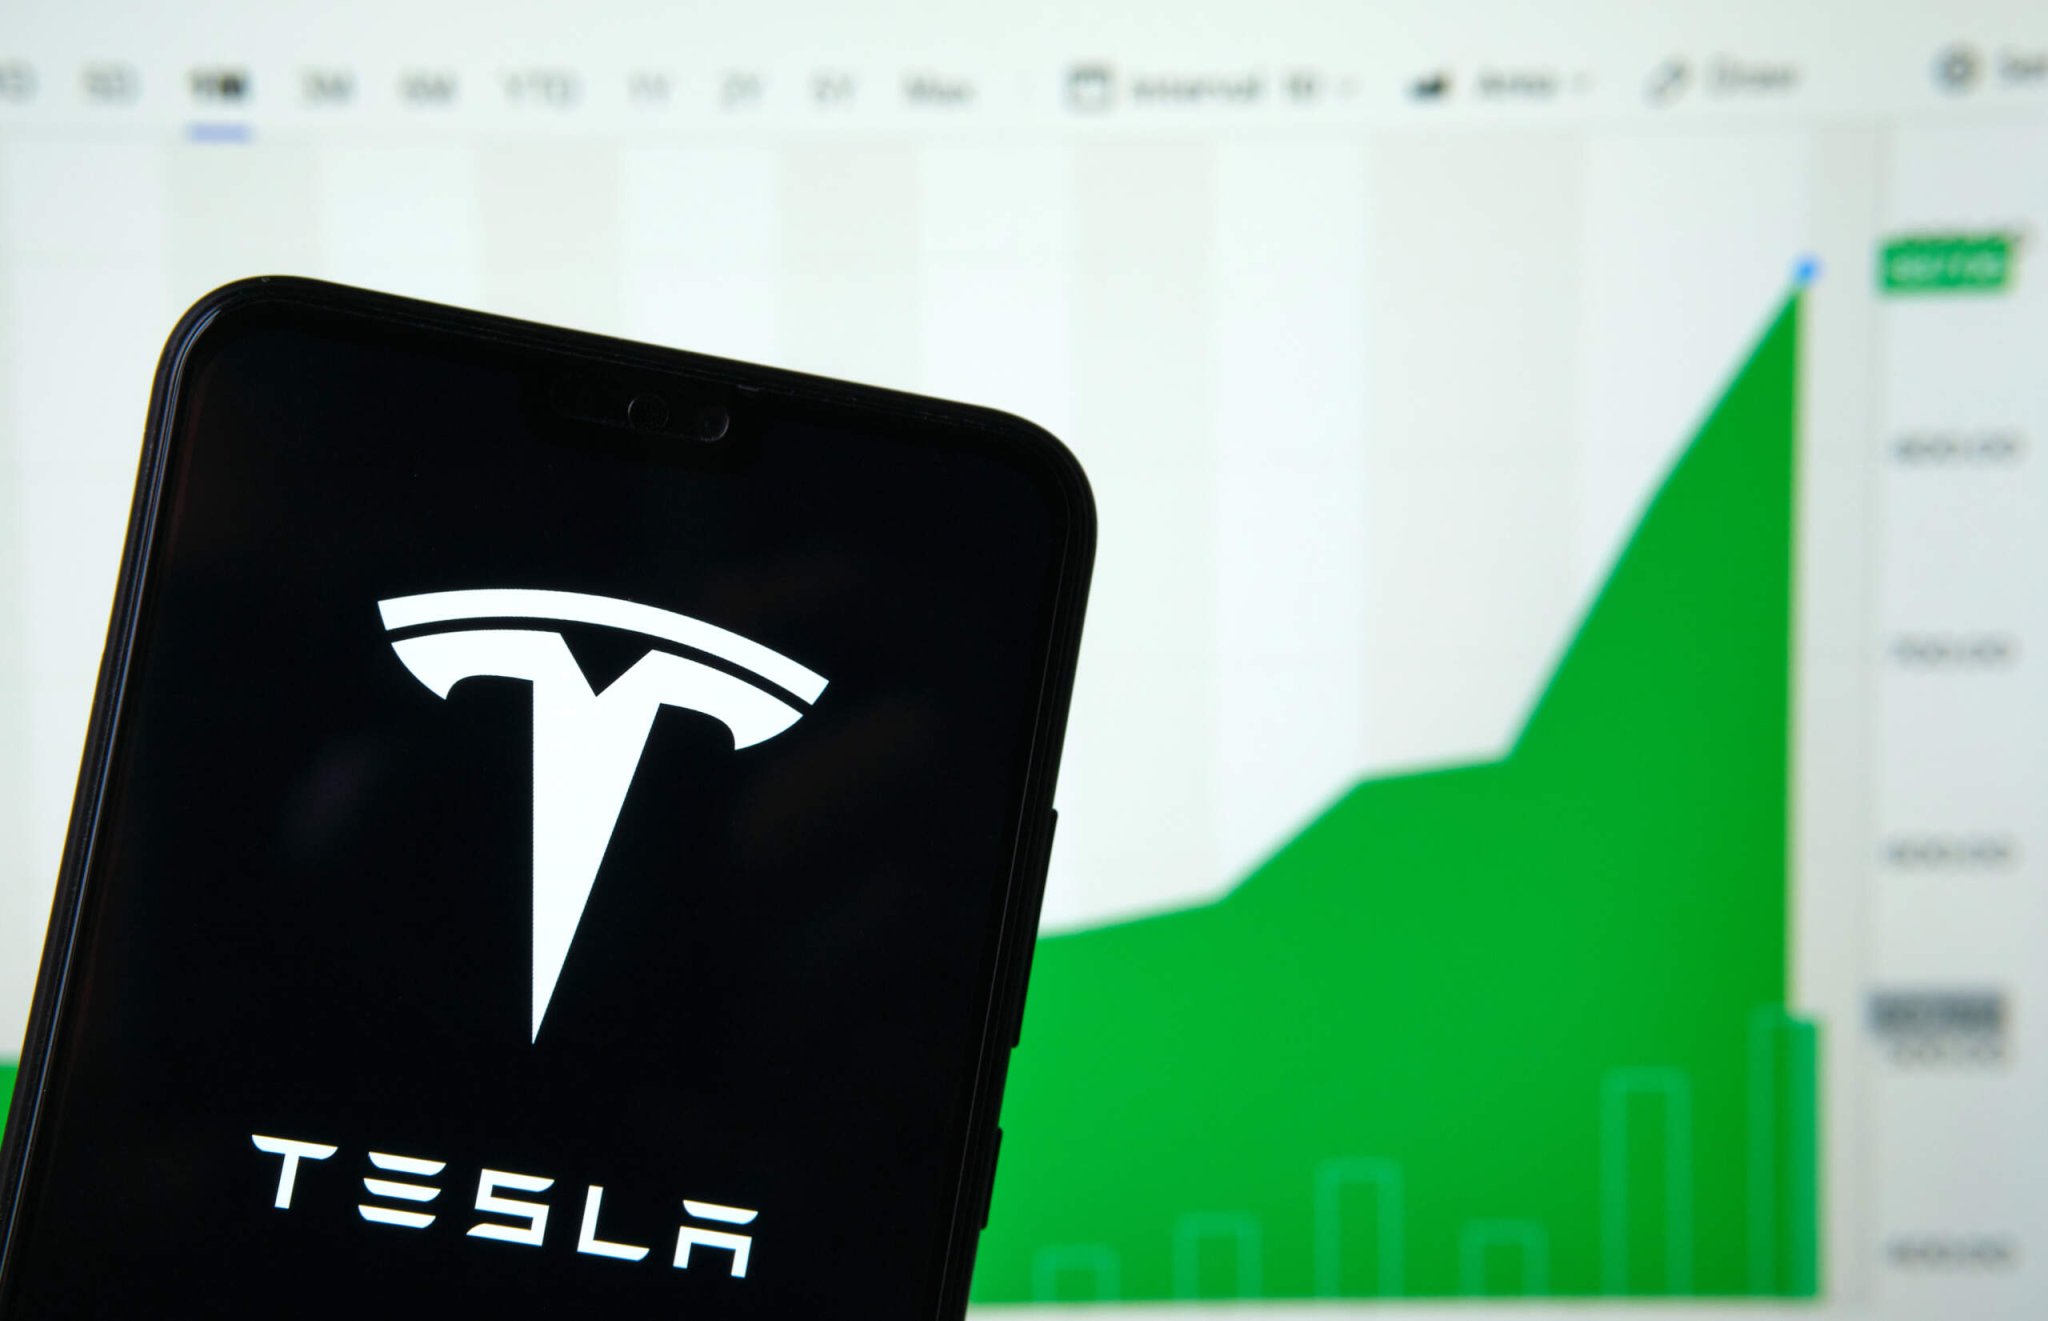 Large Tesla Stock Trade Expected Ahead Of S&P 500 Inclusion